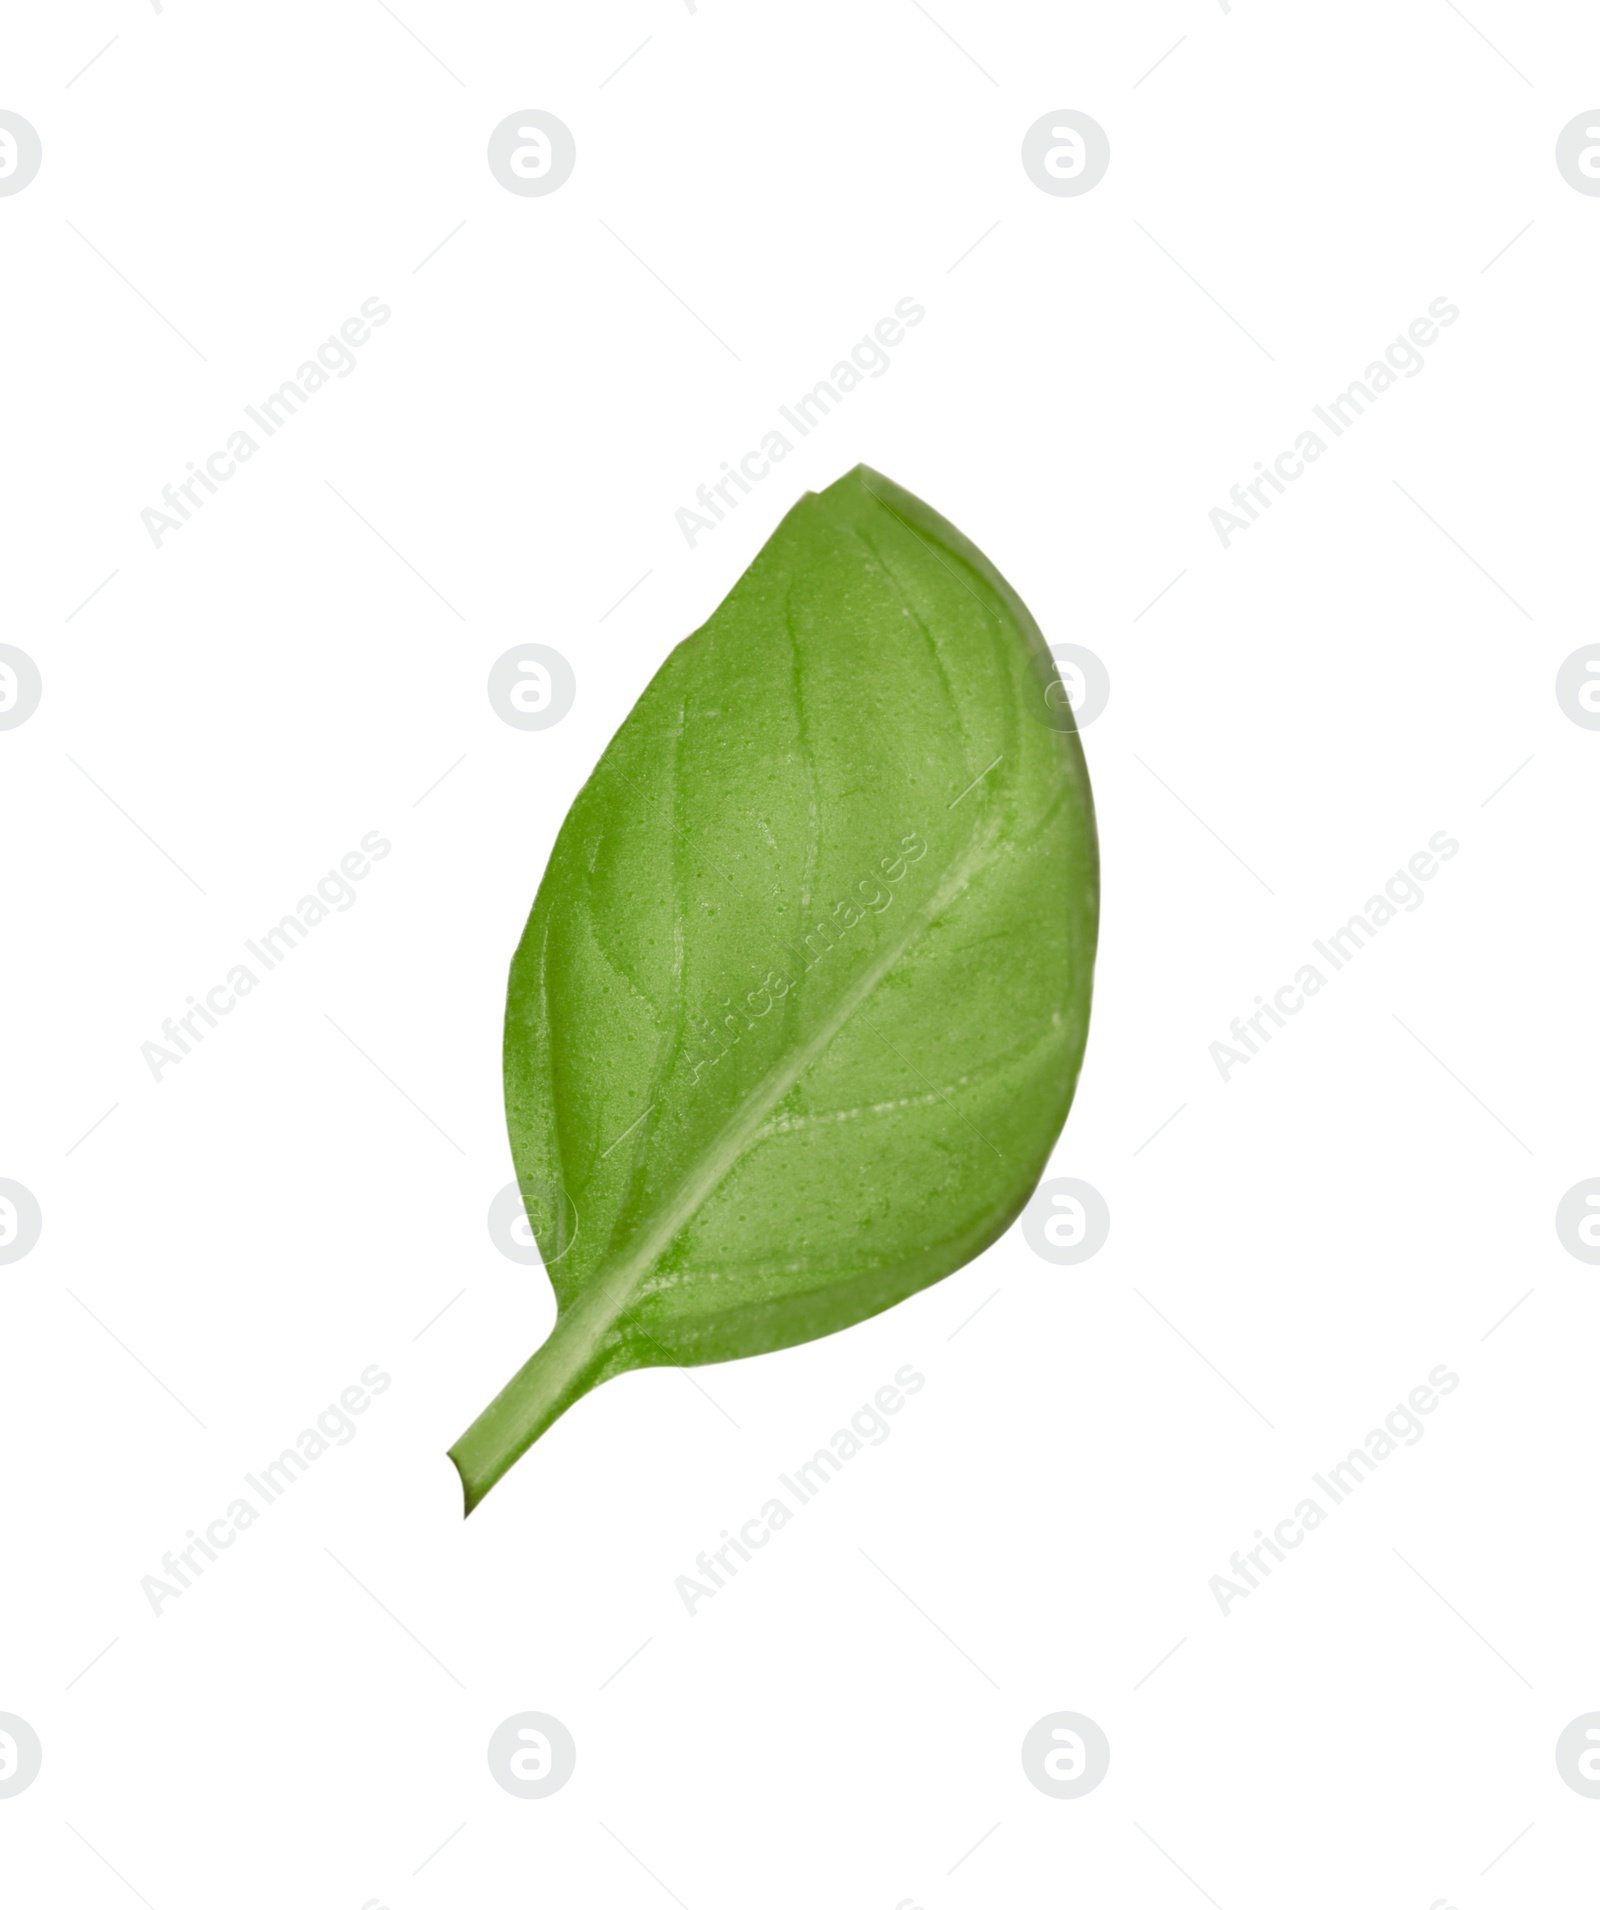 Photo of One green basil leaf isolated on white